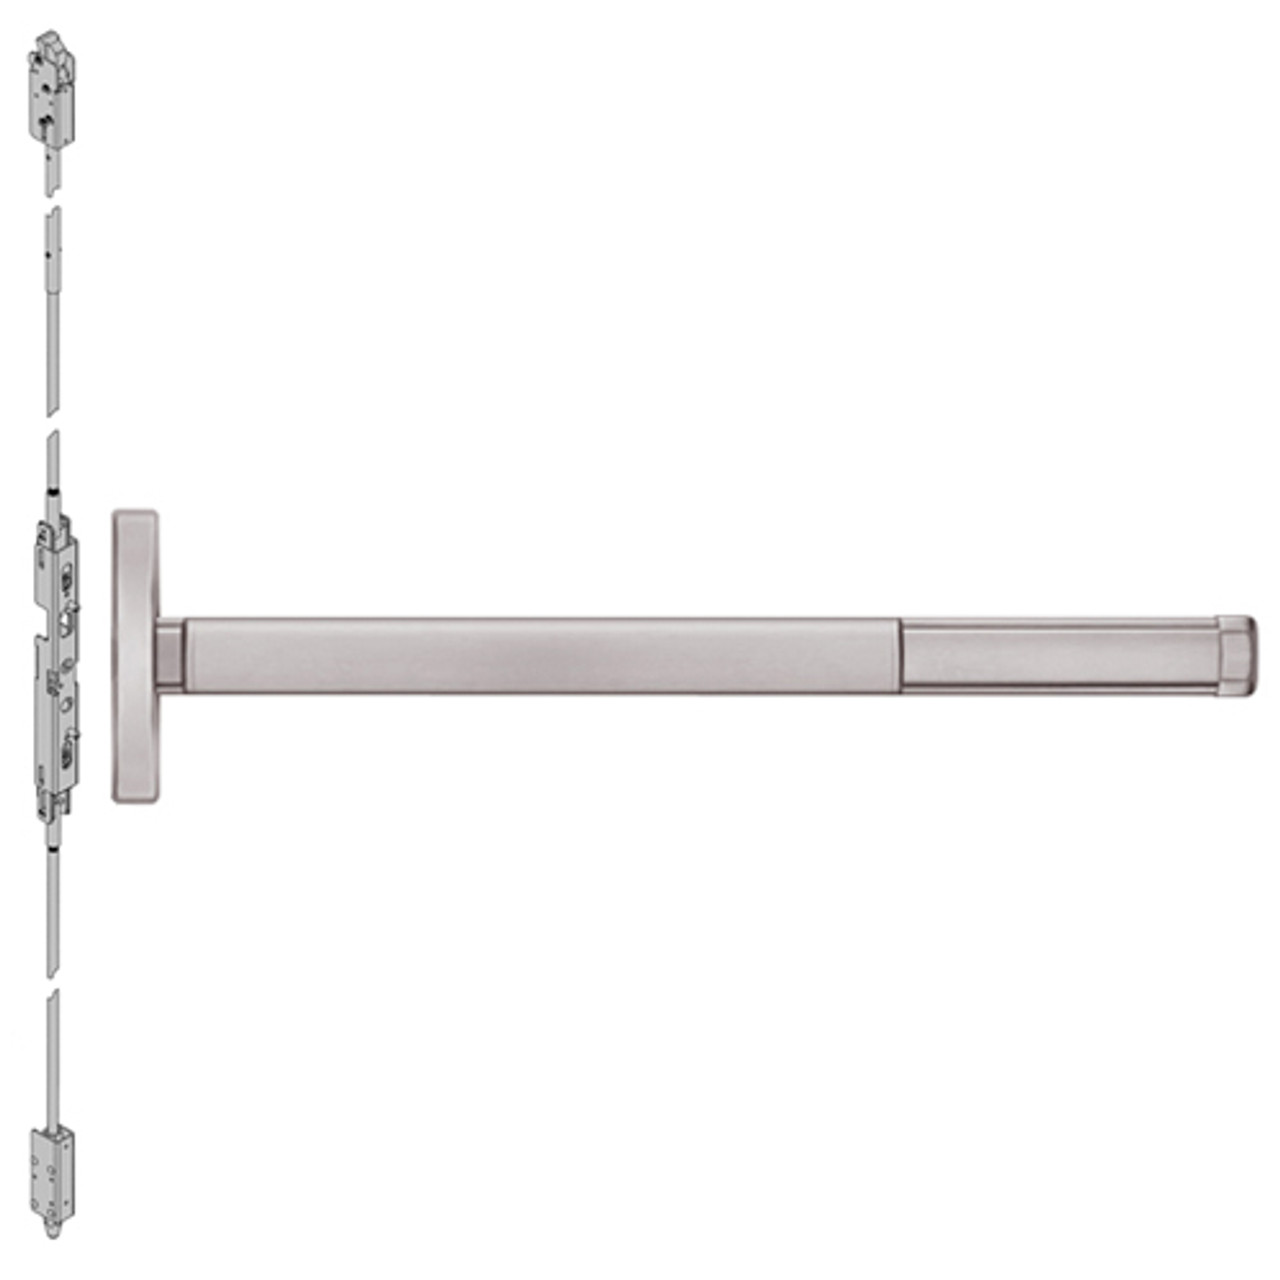 TSFL2602LBR-628-48 PHI 2600 Series Fire Rated Concealed Vertical Rod Exit Device with Touchbar Monitoring Switch Prepped for Dummy Trim in Satin Aluminum Finish